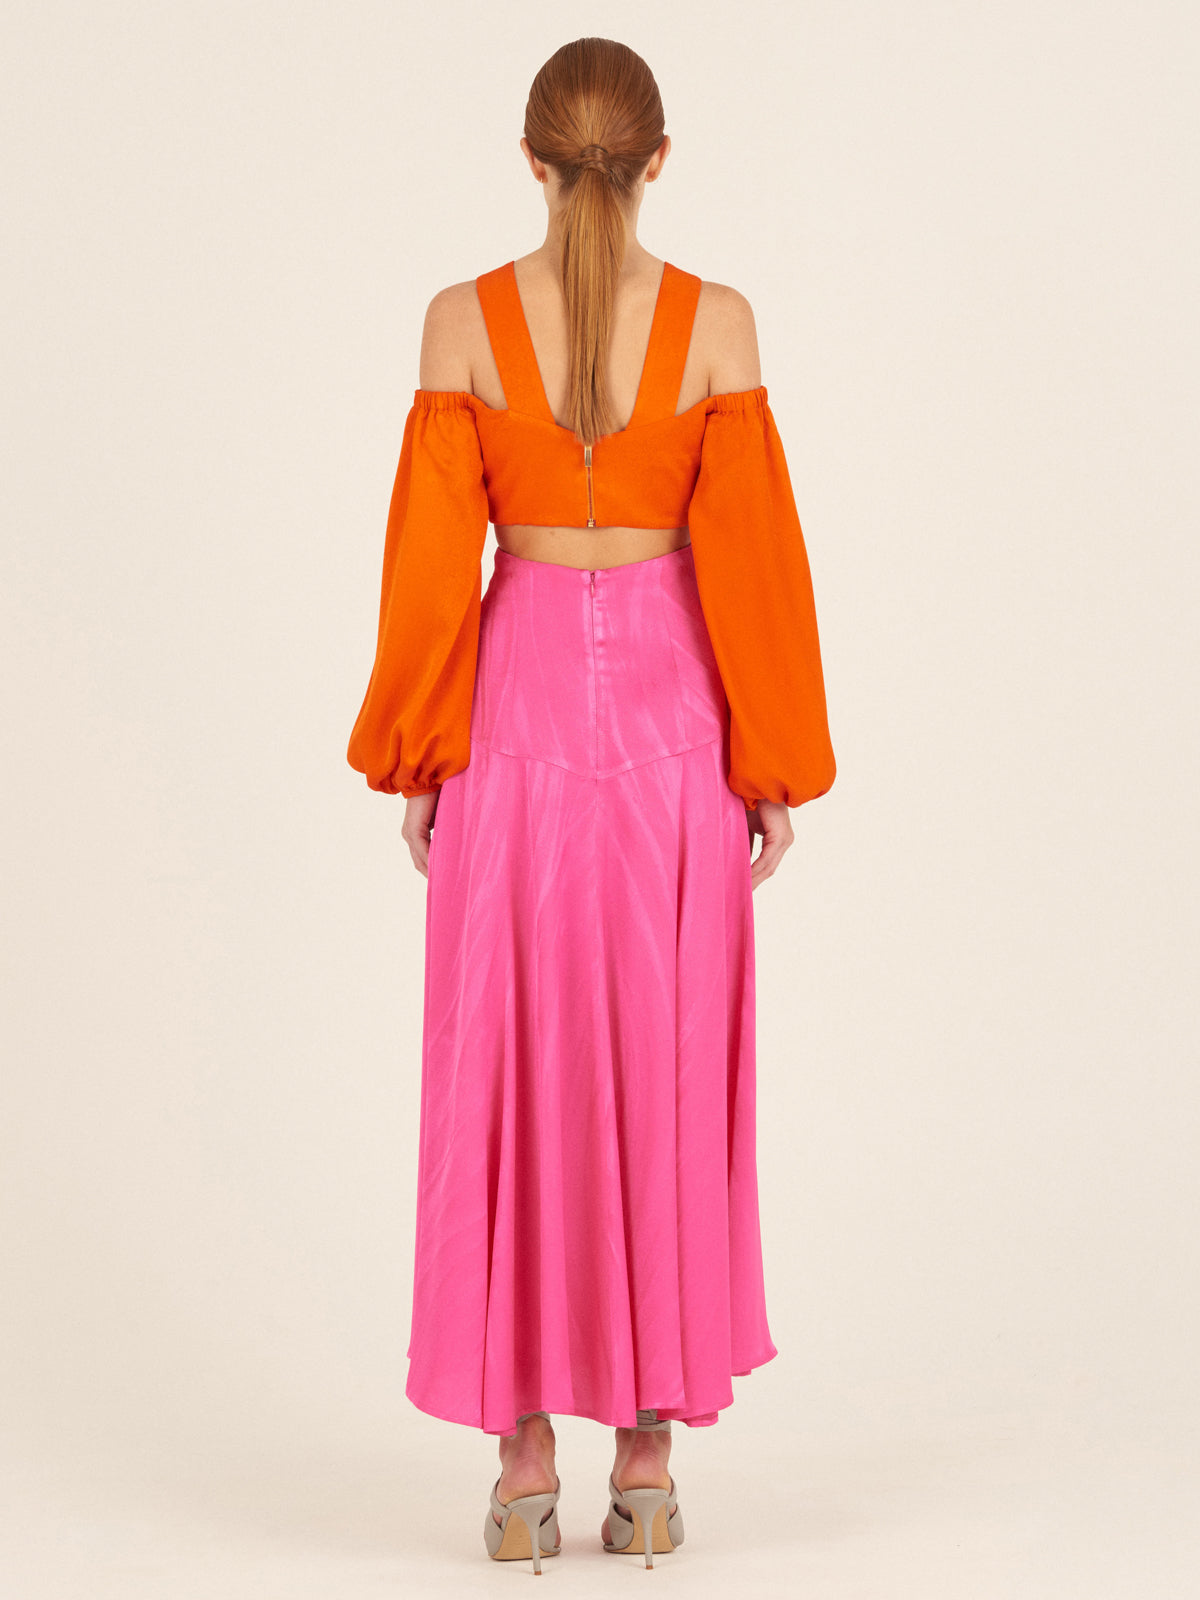 Carole Top Bright Orange off-the-shoulder crop top with billowing sleeves and a cross-body strap design, isolated on a white background.